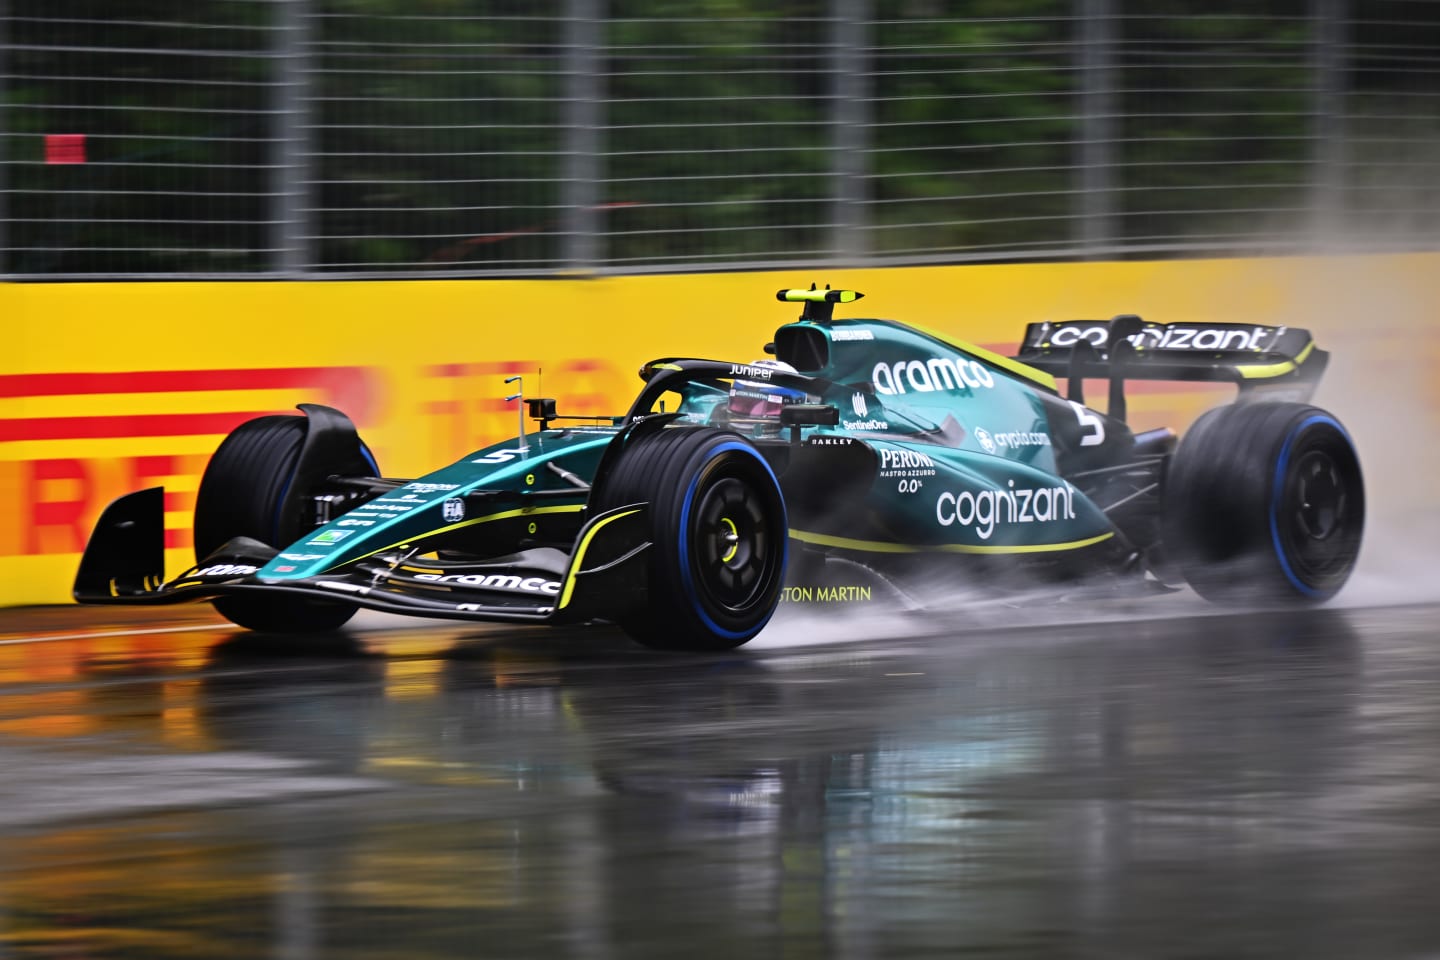 MONTREAL, QUEBEC - JUNE 18: Sebastian Vettel of Germany driving the (5) Aston Martin AMR22 Mercedes in the wet during final practice ahead of the F1 Grand Prix of Canada at Circuit Gilles Villeneuve on June 18, 2022 in Montreal, Quebec. (Photo by Clive Mason/Getty Images)